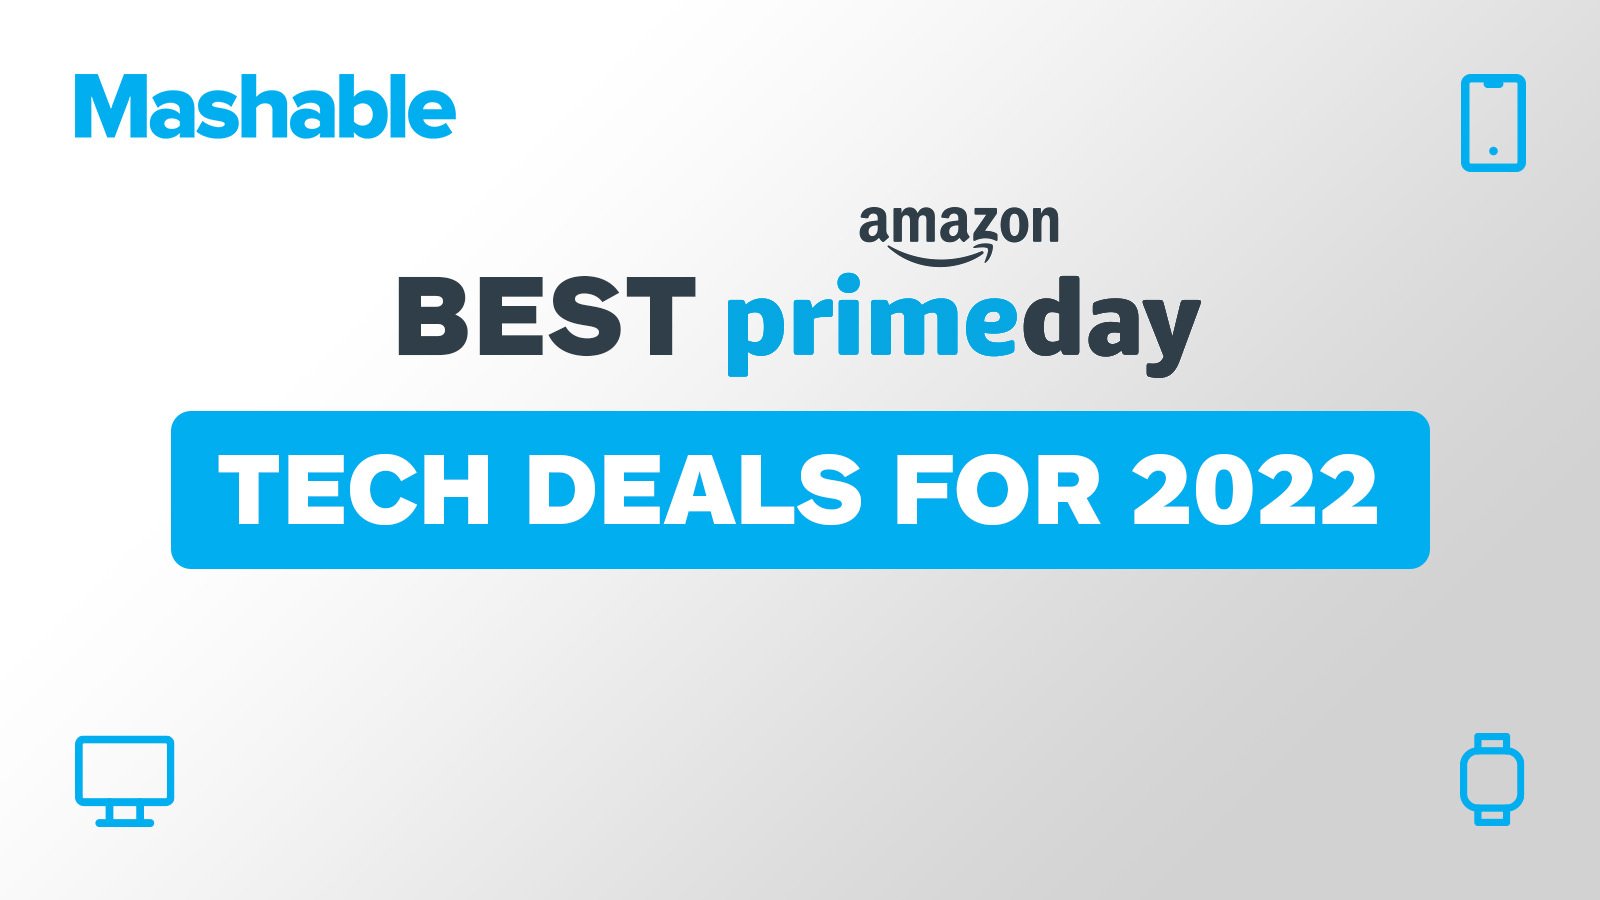 Prime Day deals on Mashable